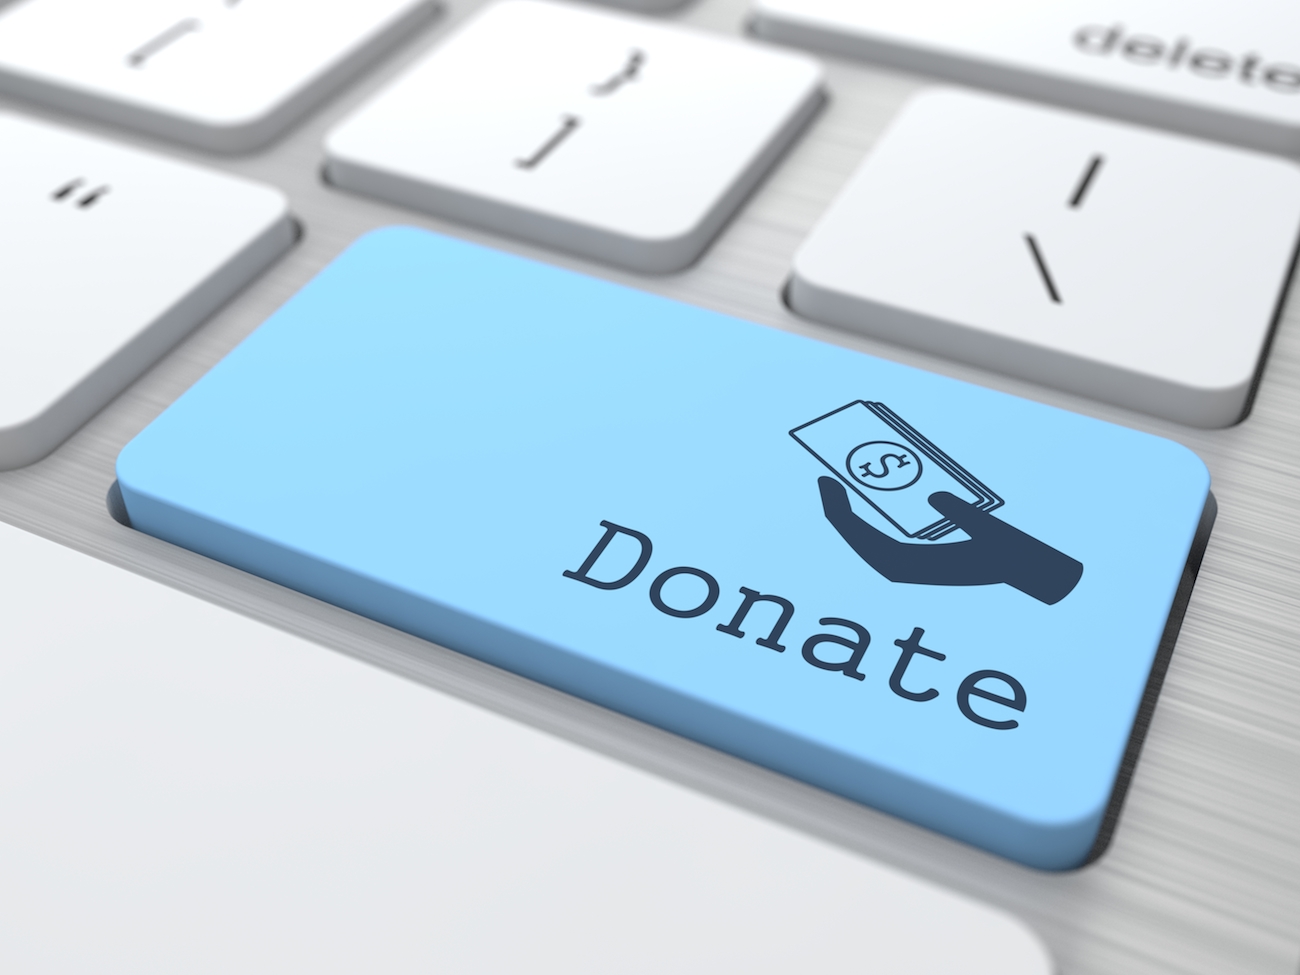 South Korea’s SK Group Proposes Blockchain-Based Donation Platform And Two Tokens